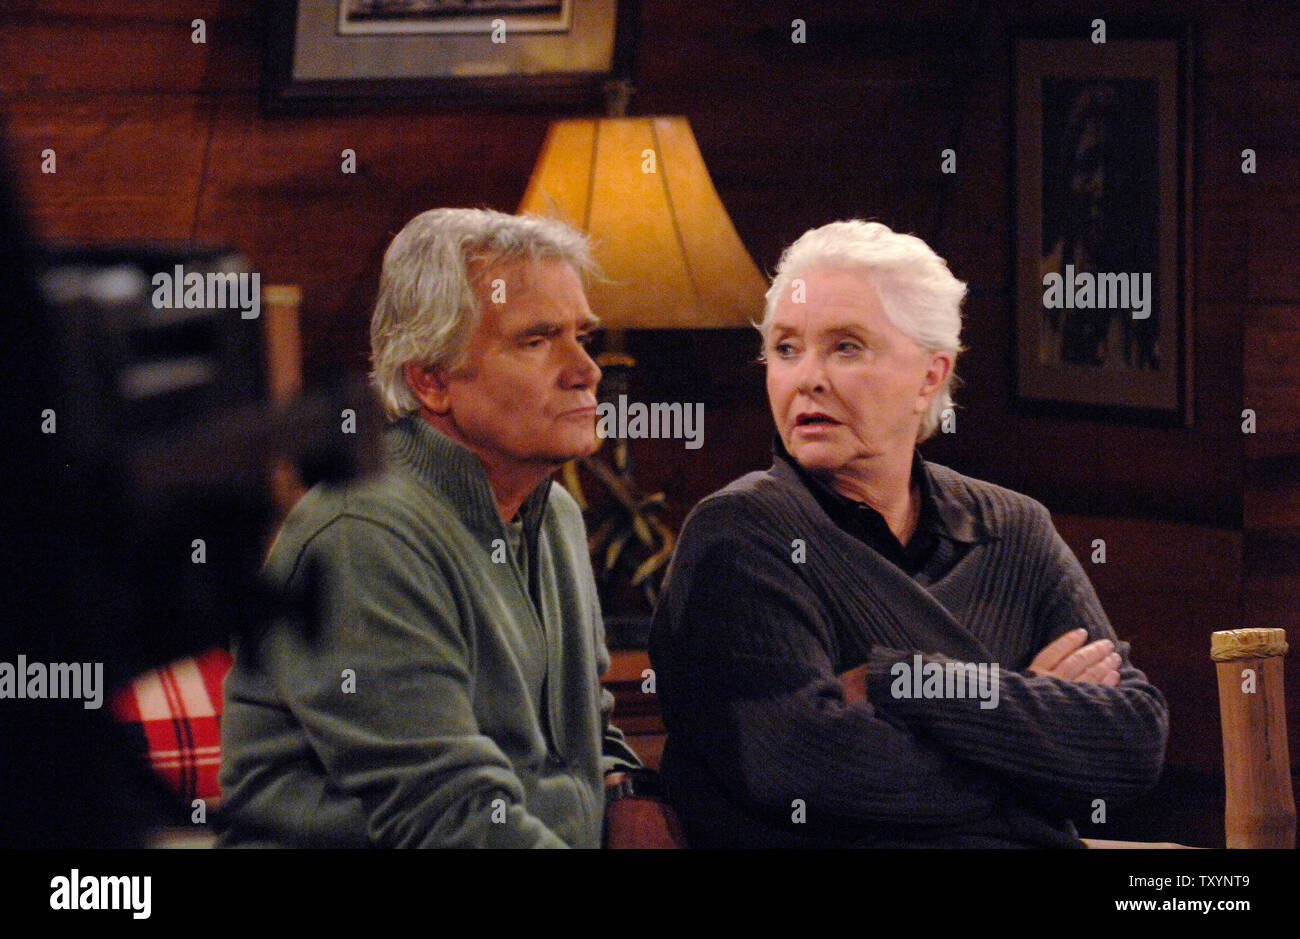 Cast members John McCook (L) and Susan Flannery rehearse during the taping of the 5000th episode of 'The Bold and the Beautiful' in Los Angeles on January 23, 2007. (UPI Photo/ Phil McCarten) Stock Photo